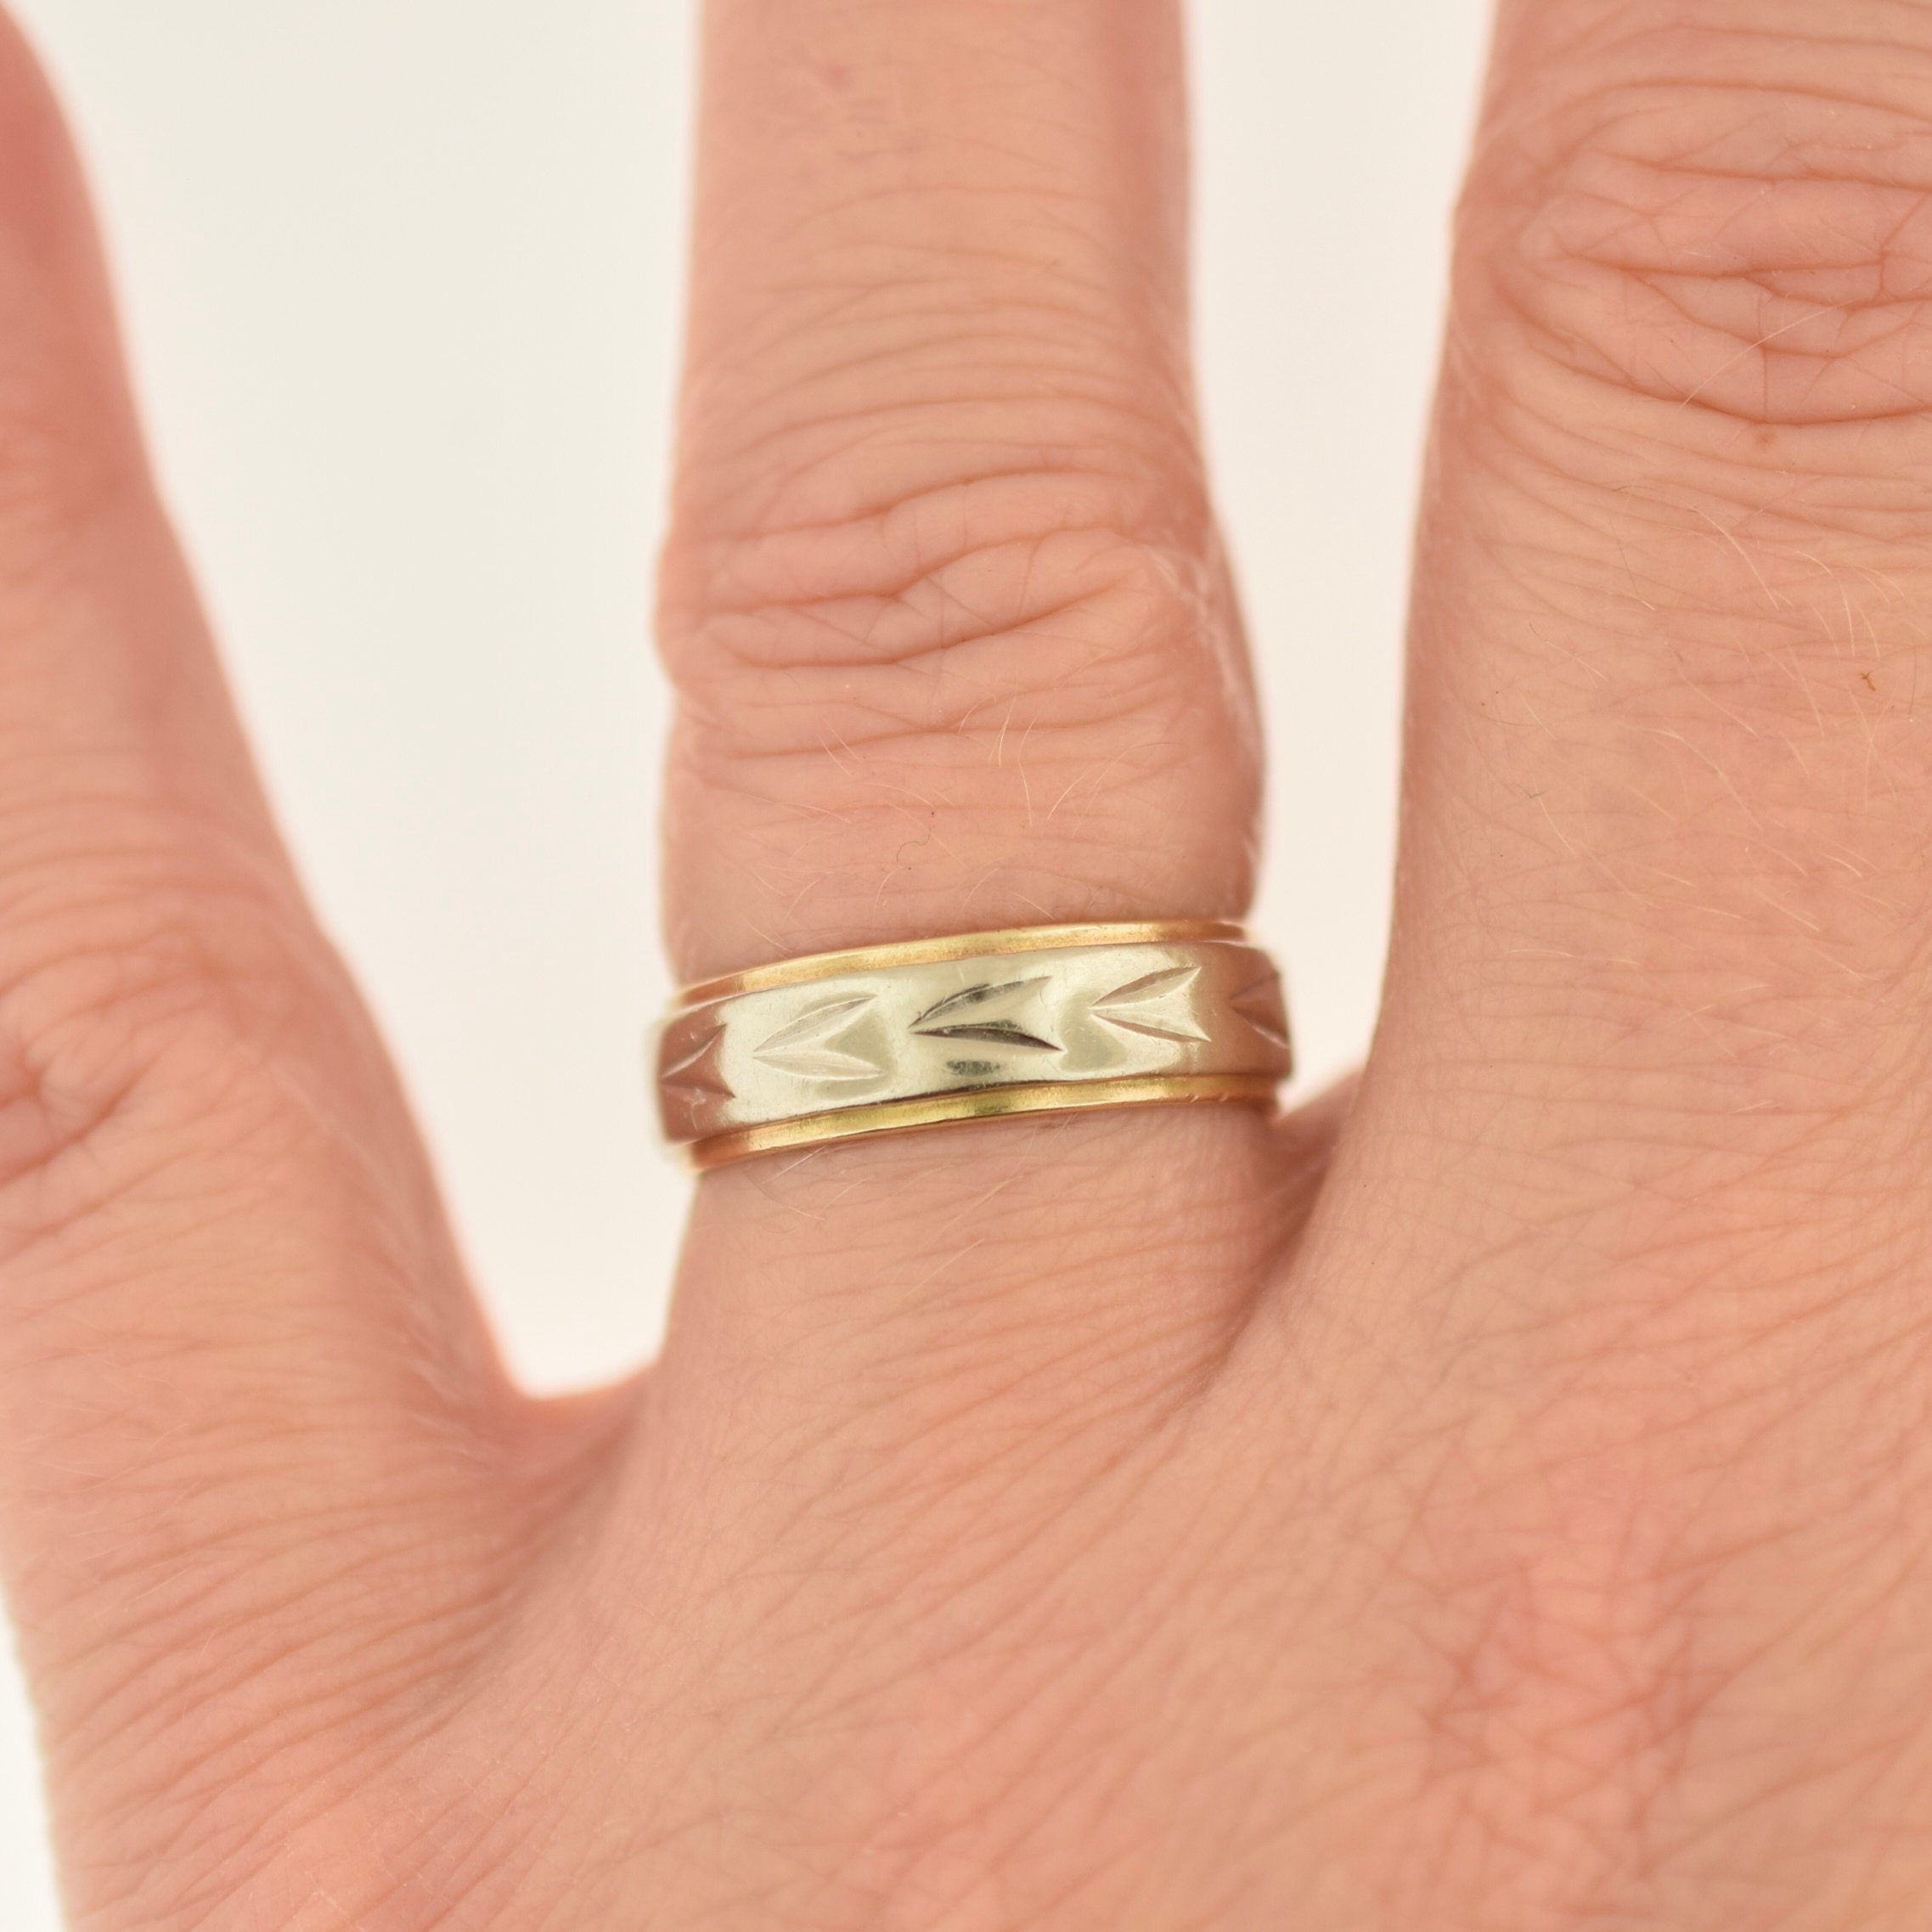 14k Vintage Stacking Band Mid-Century Heavenly Geometric Pattern Wedding Ring 5mm Sz 6.75 MCM Estate Gold Ring Vintage Gold Ring Estate Sale Jewelry Ring for Woman Antique Ring Patterned Band Vintage Gold Band by Heavenly. Rutledge Exchange Camden